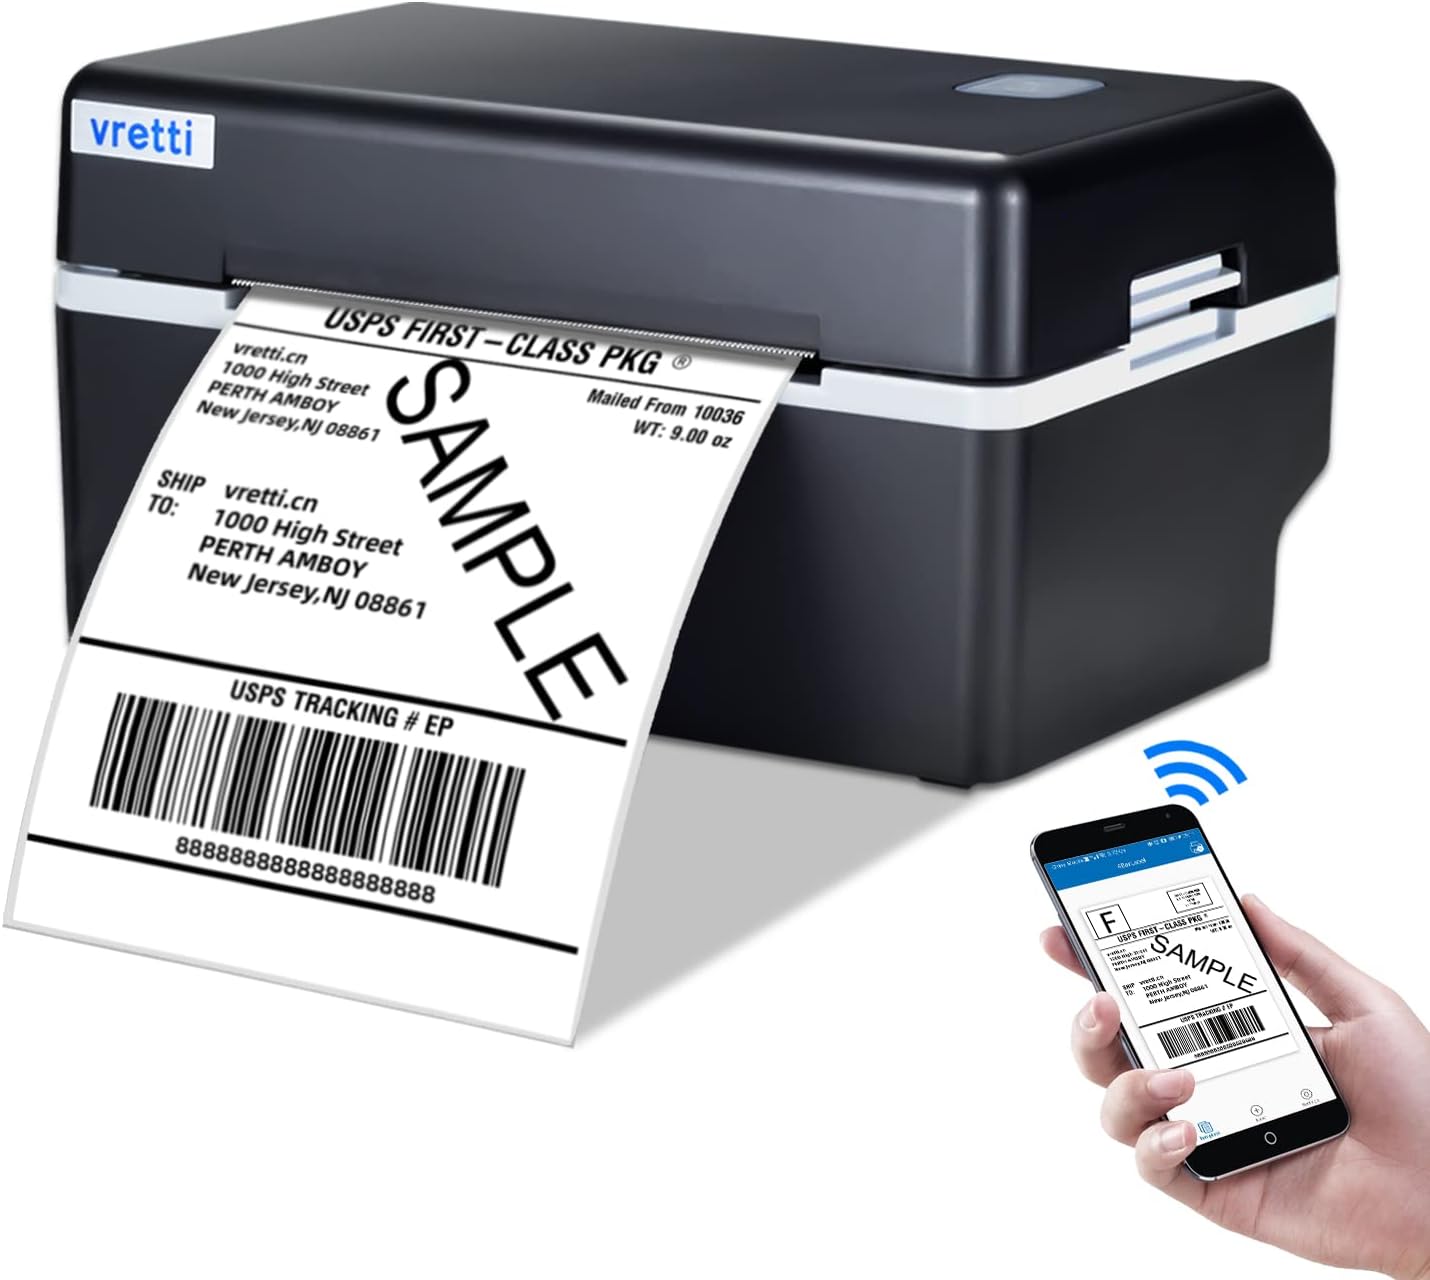 64833caa1aea5d61d4597a58 vretti bluetooth thermal shipping label